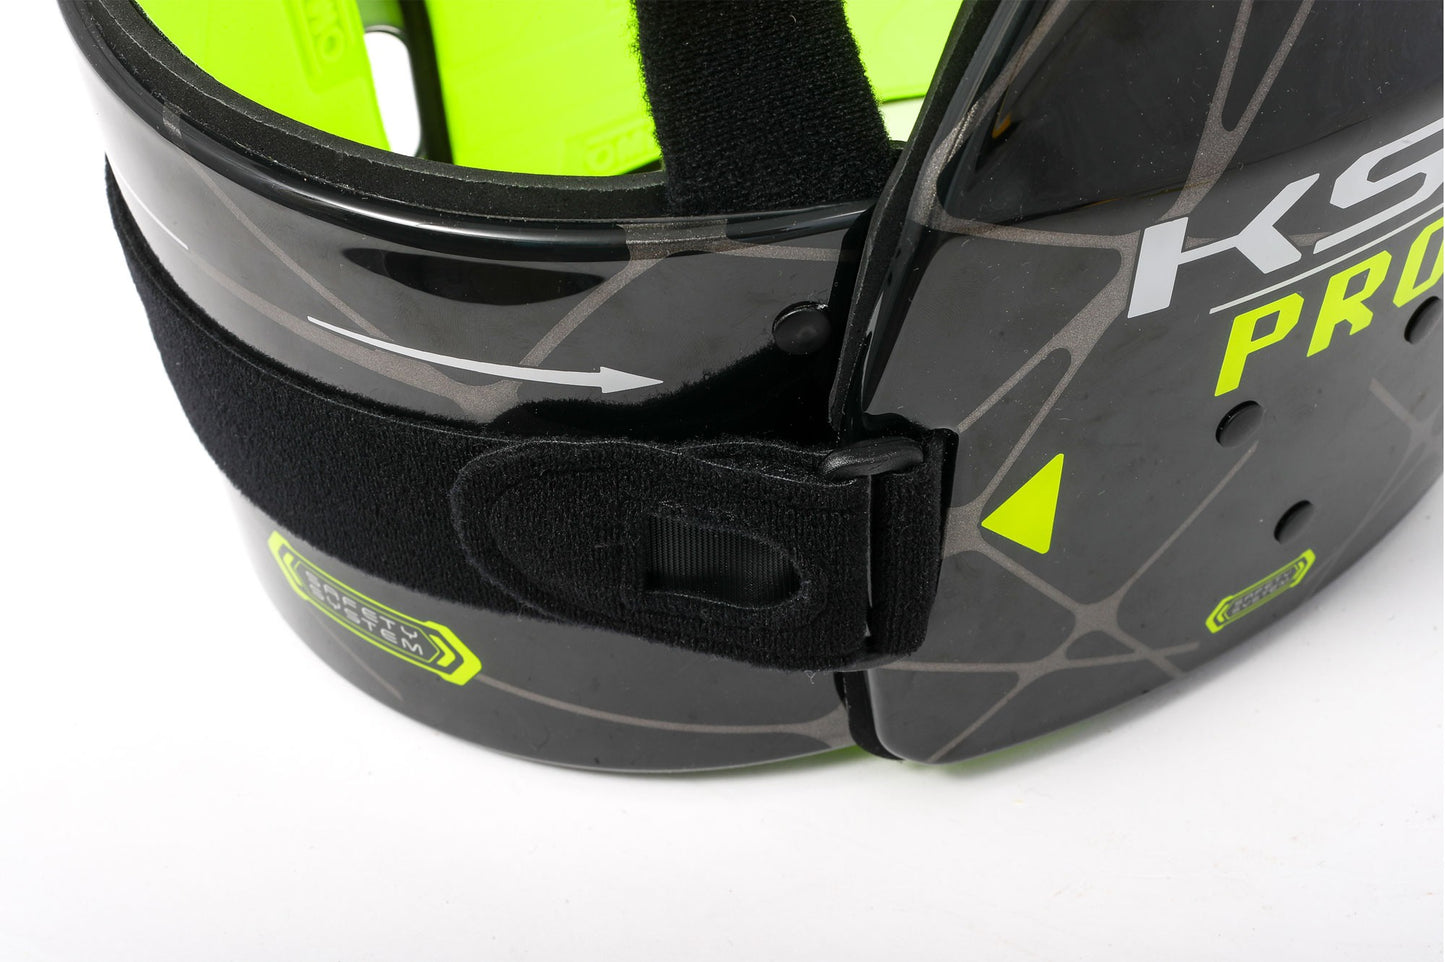 OMP Racing - KS-1 PRO BODY PROTECTION DRIVEN | Performance Products